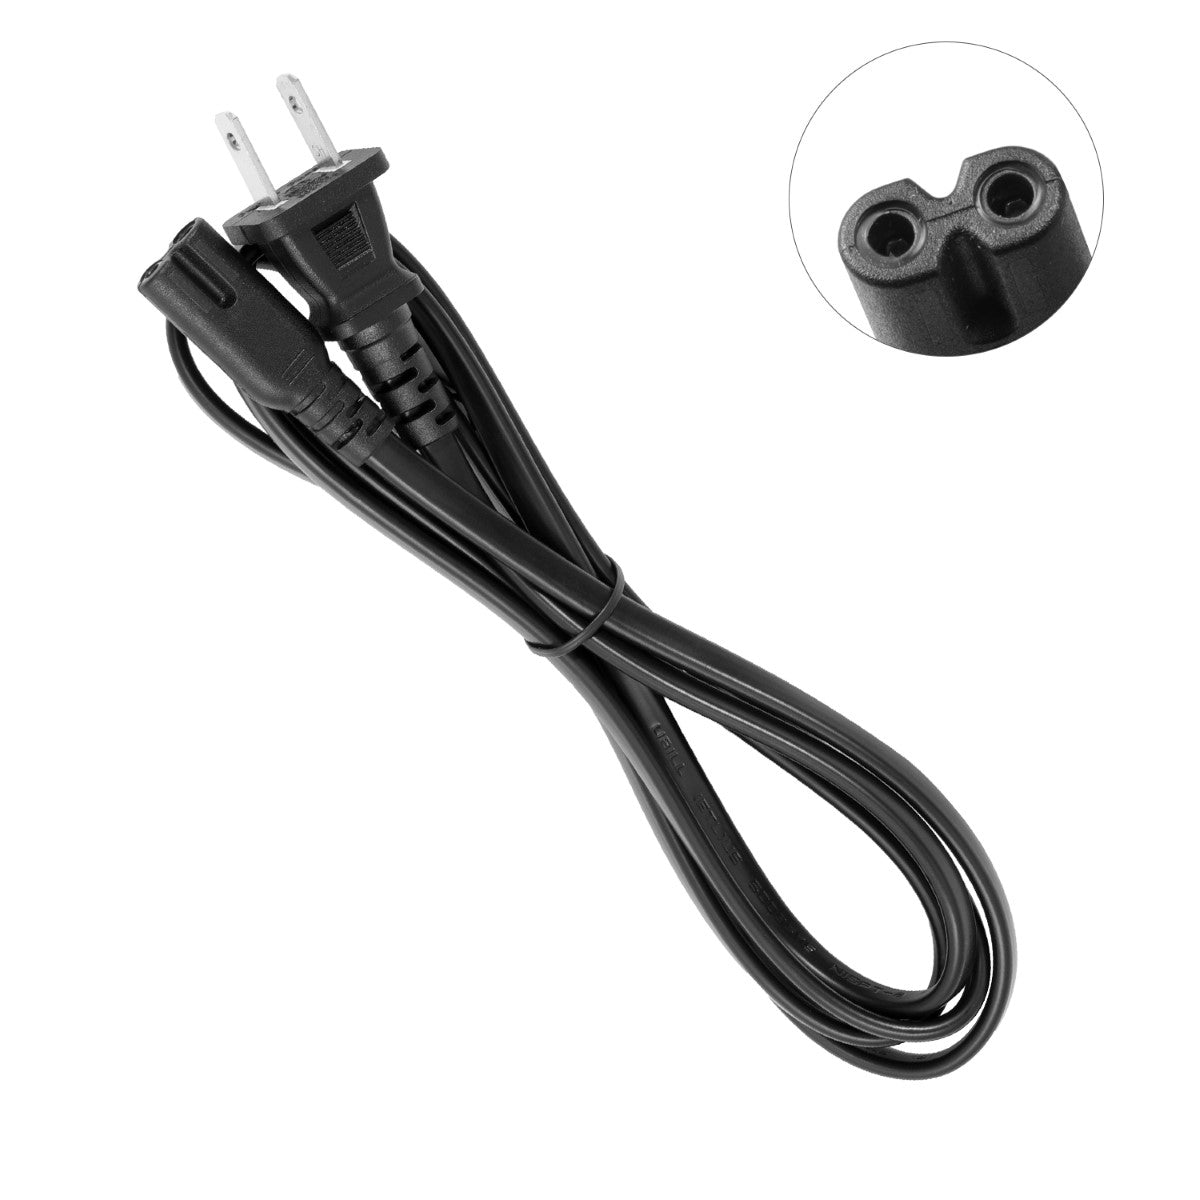 Power Cord for HP ENVY 5530 e-All-in-One Printer.